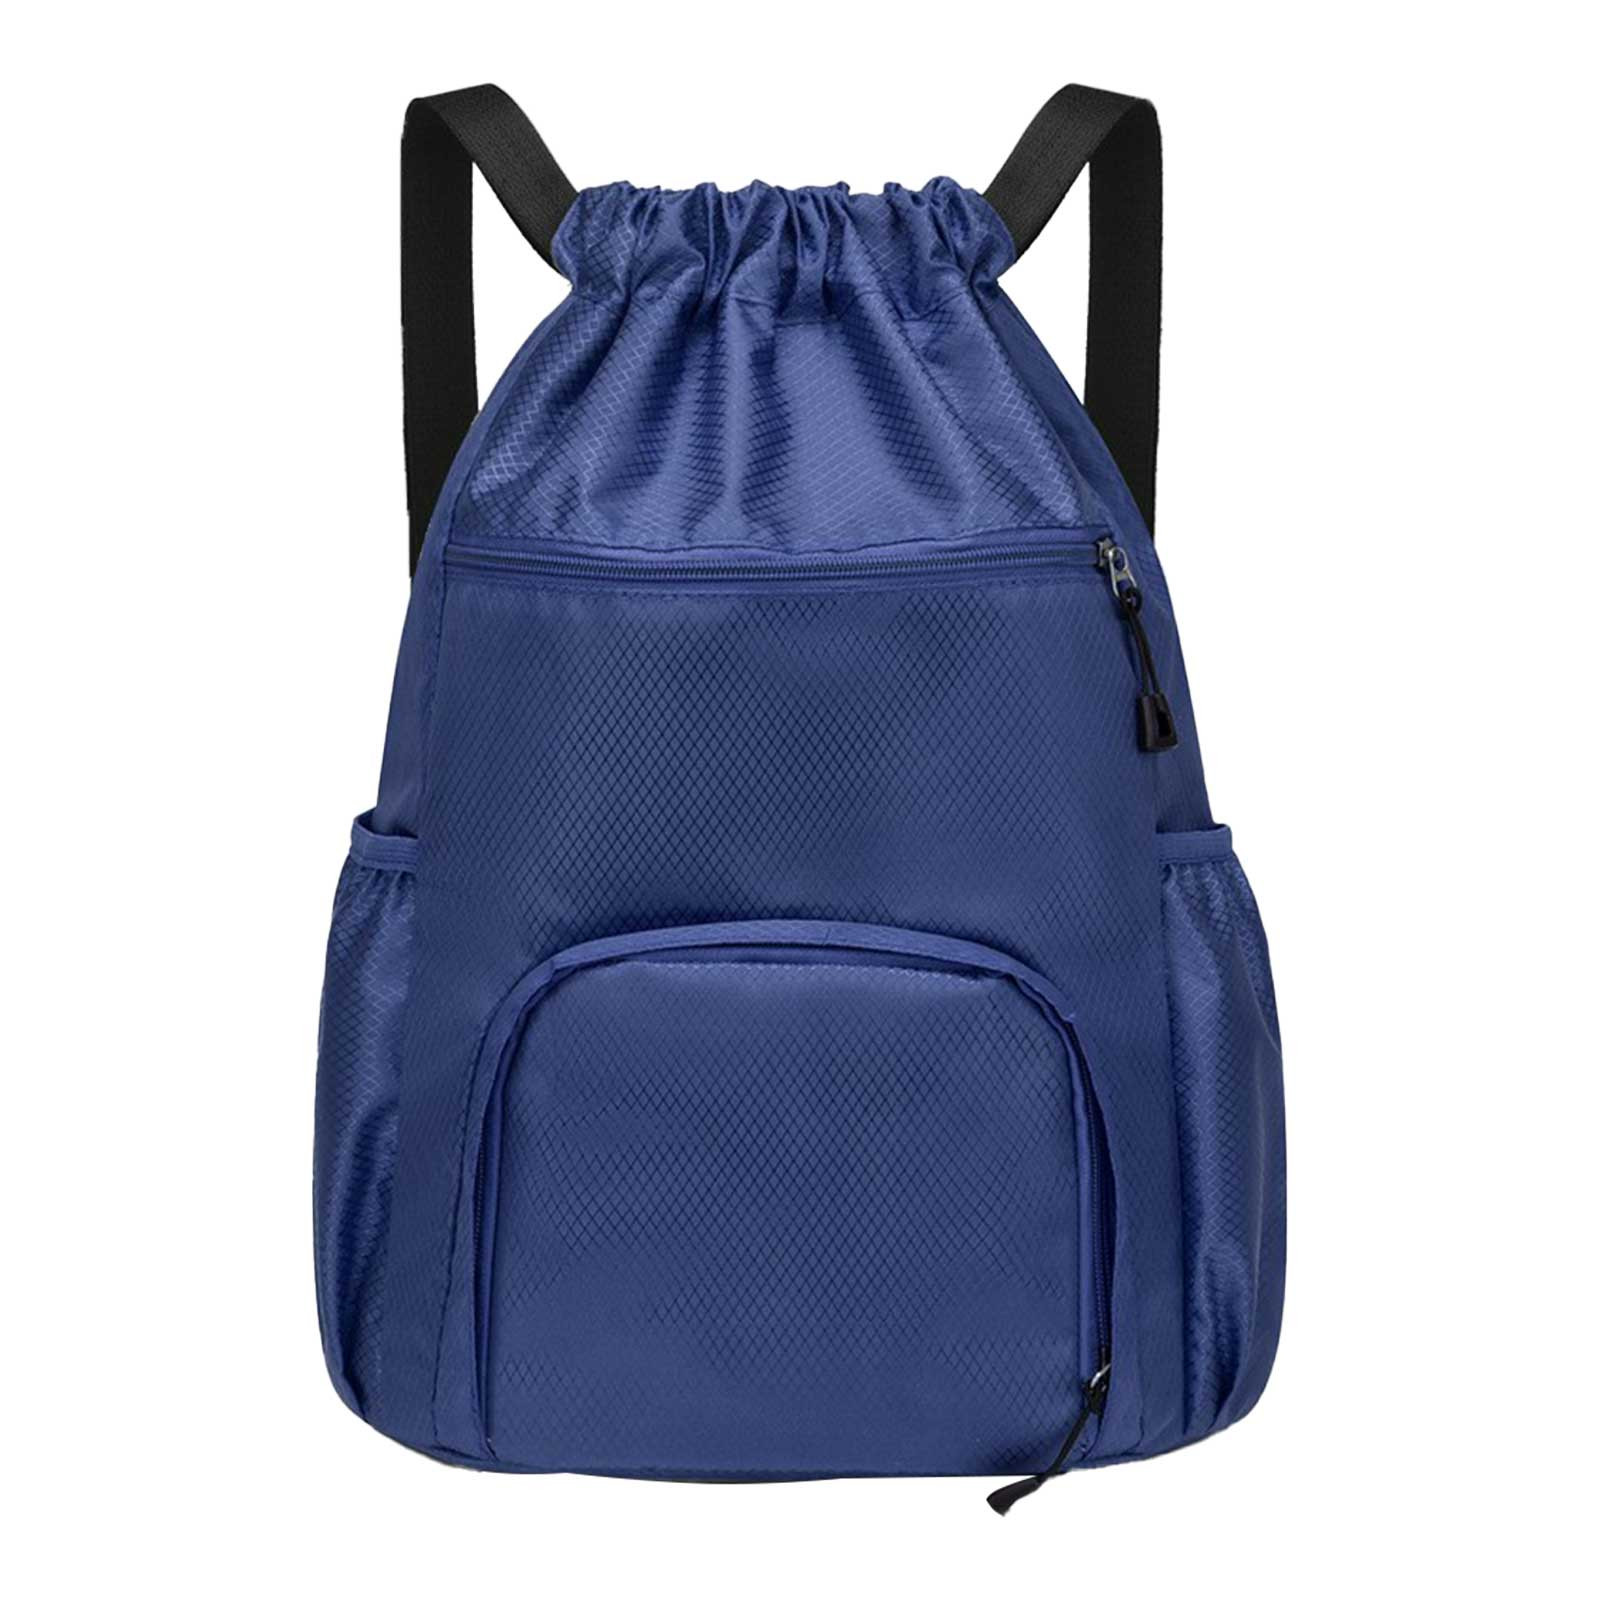 Sports Outdoors Sports Accessories Mesh Basketball Football Bag With Ball And Shoe Compartment For Boys Girls Man Women Ball Equipment Pack Soccer Backpack Sports Volleyball Dark Blue - image 2 of 8